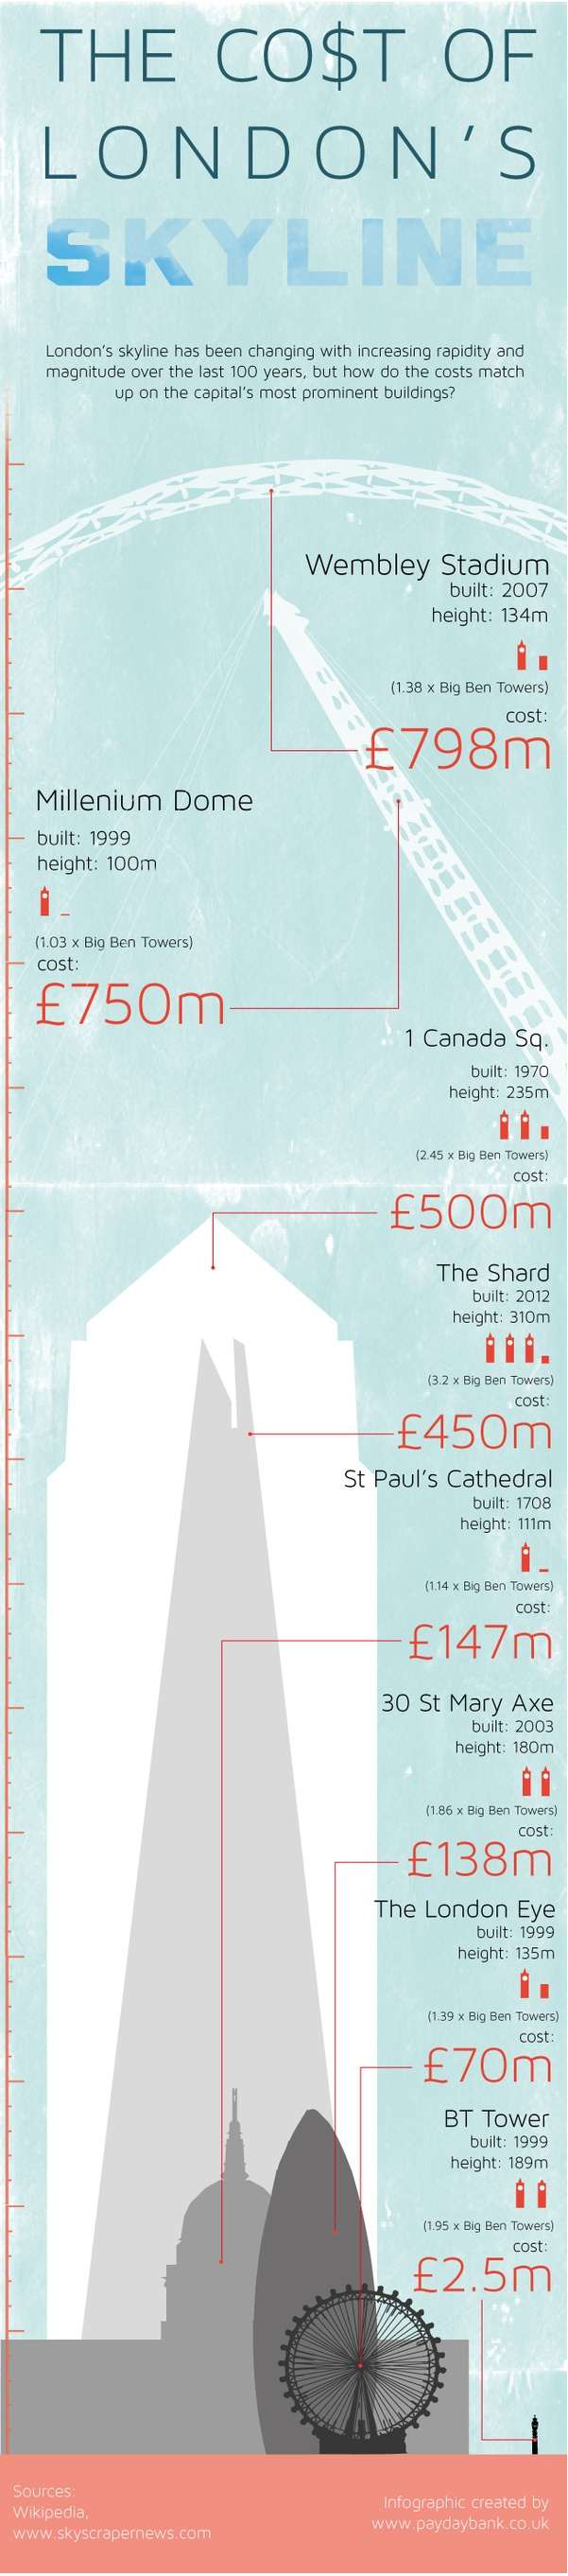 The Cost of London's Skyline